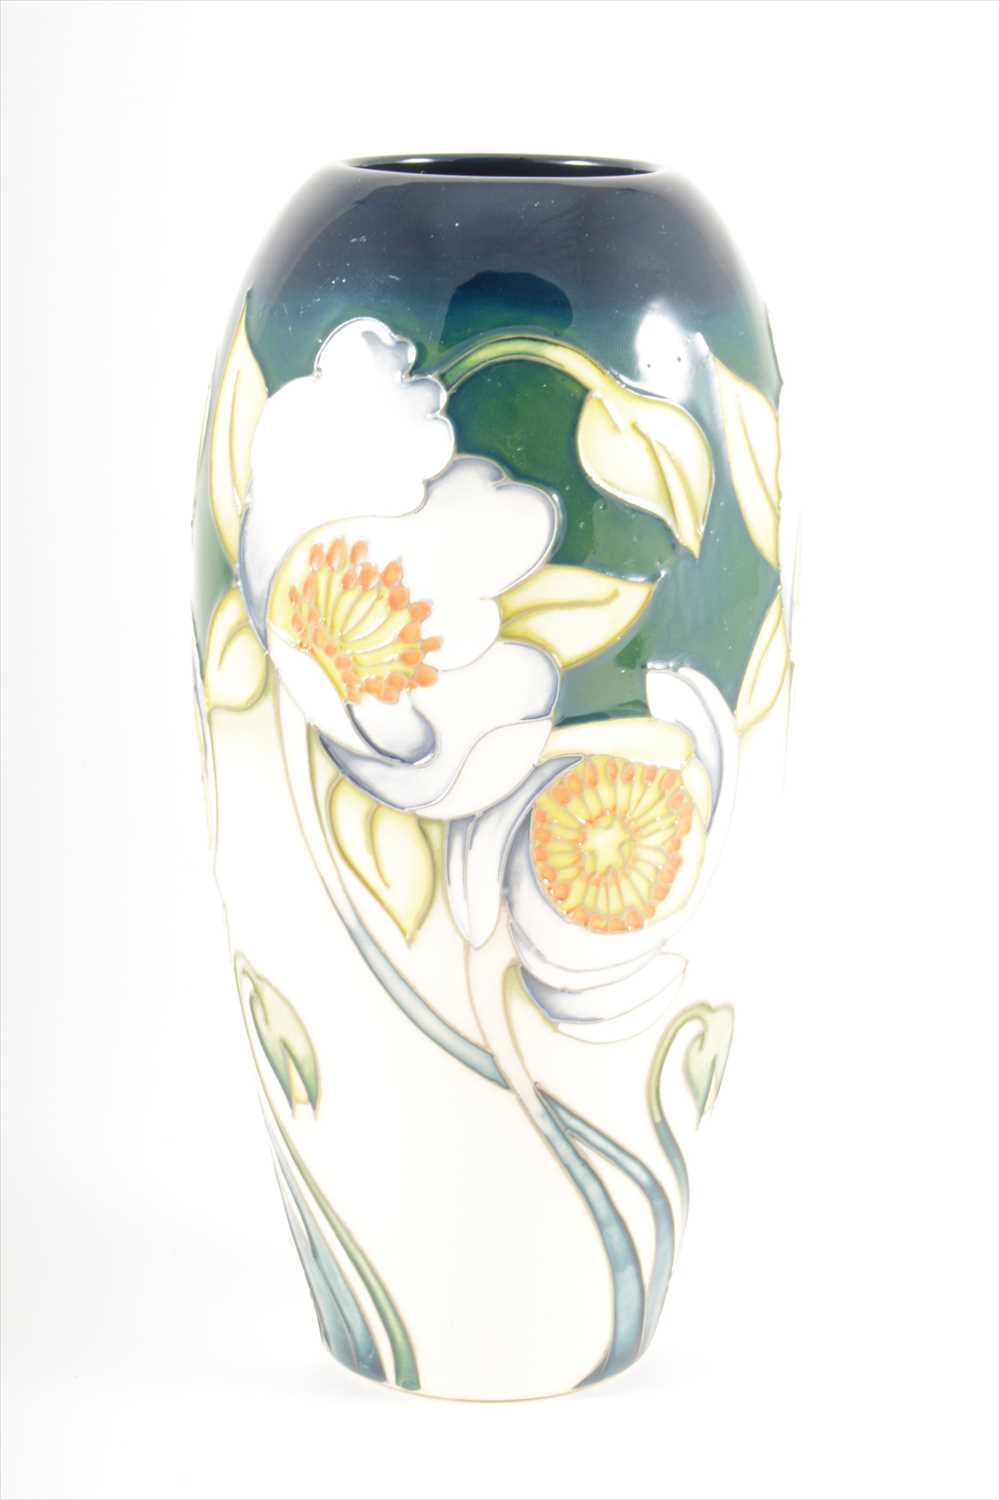 Lot 61 - A trial design vase, by Moorcroft Pottery, 2017.